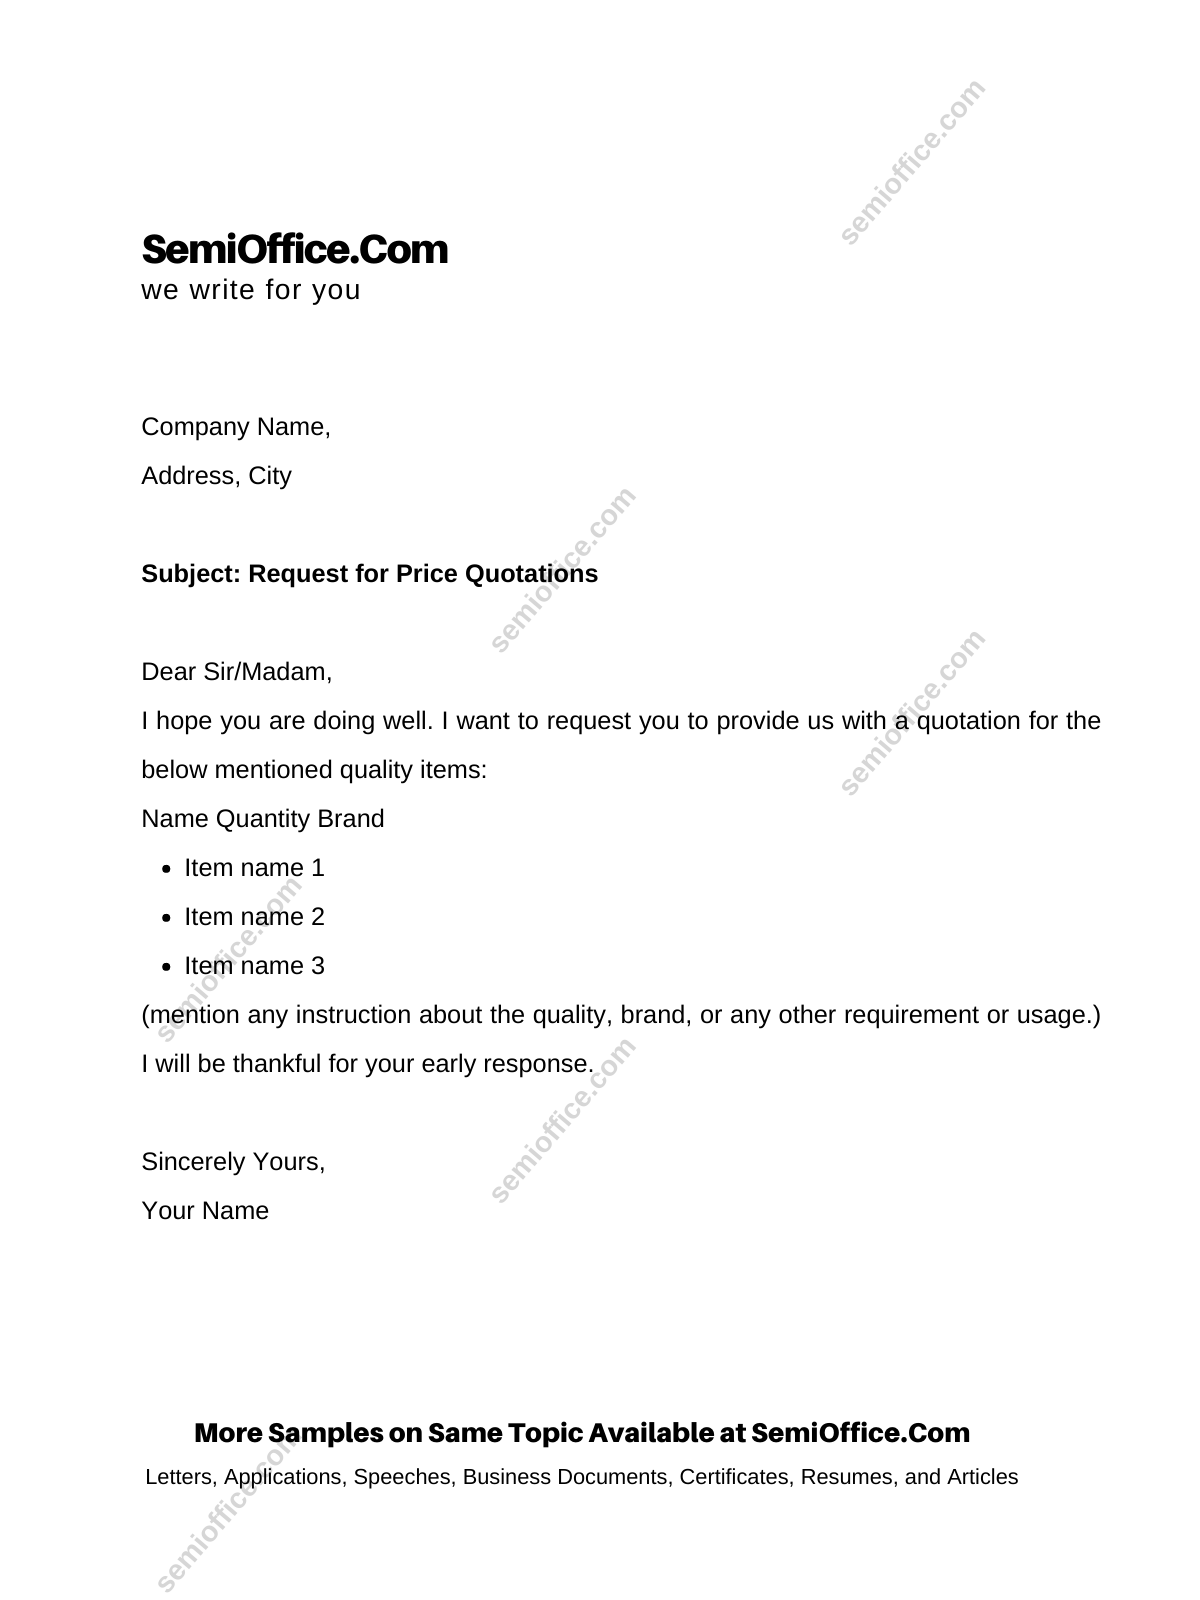 sample-letter-for-requesting-quotations-semioffice-com